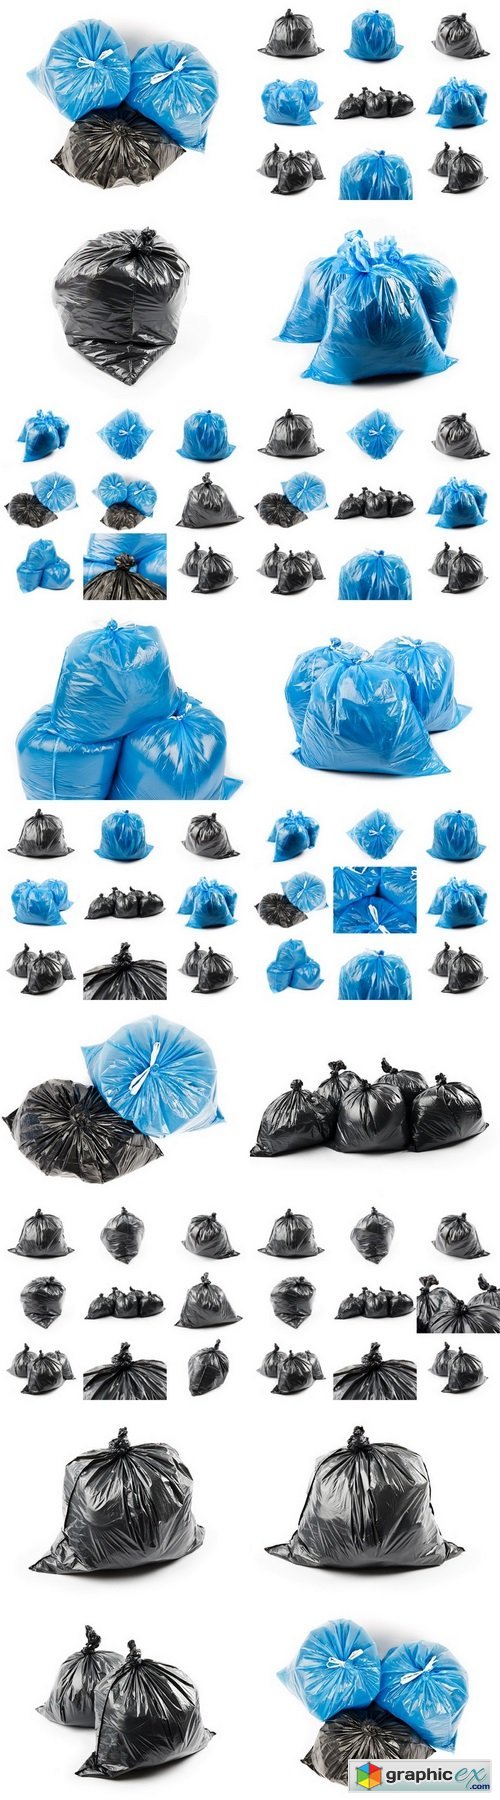 Collage of black and blue garbage bags